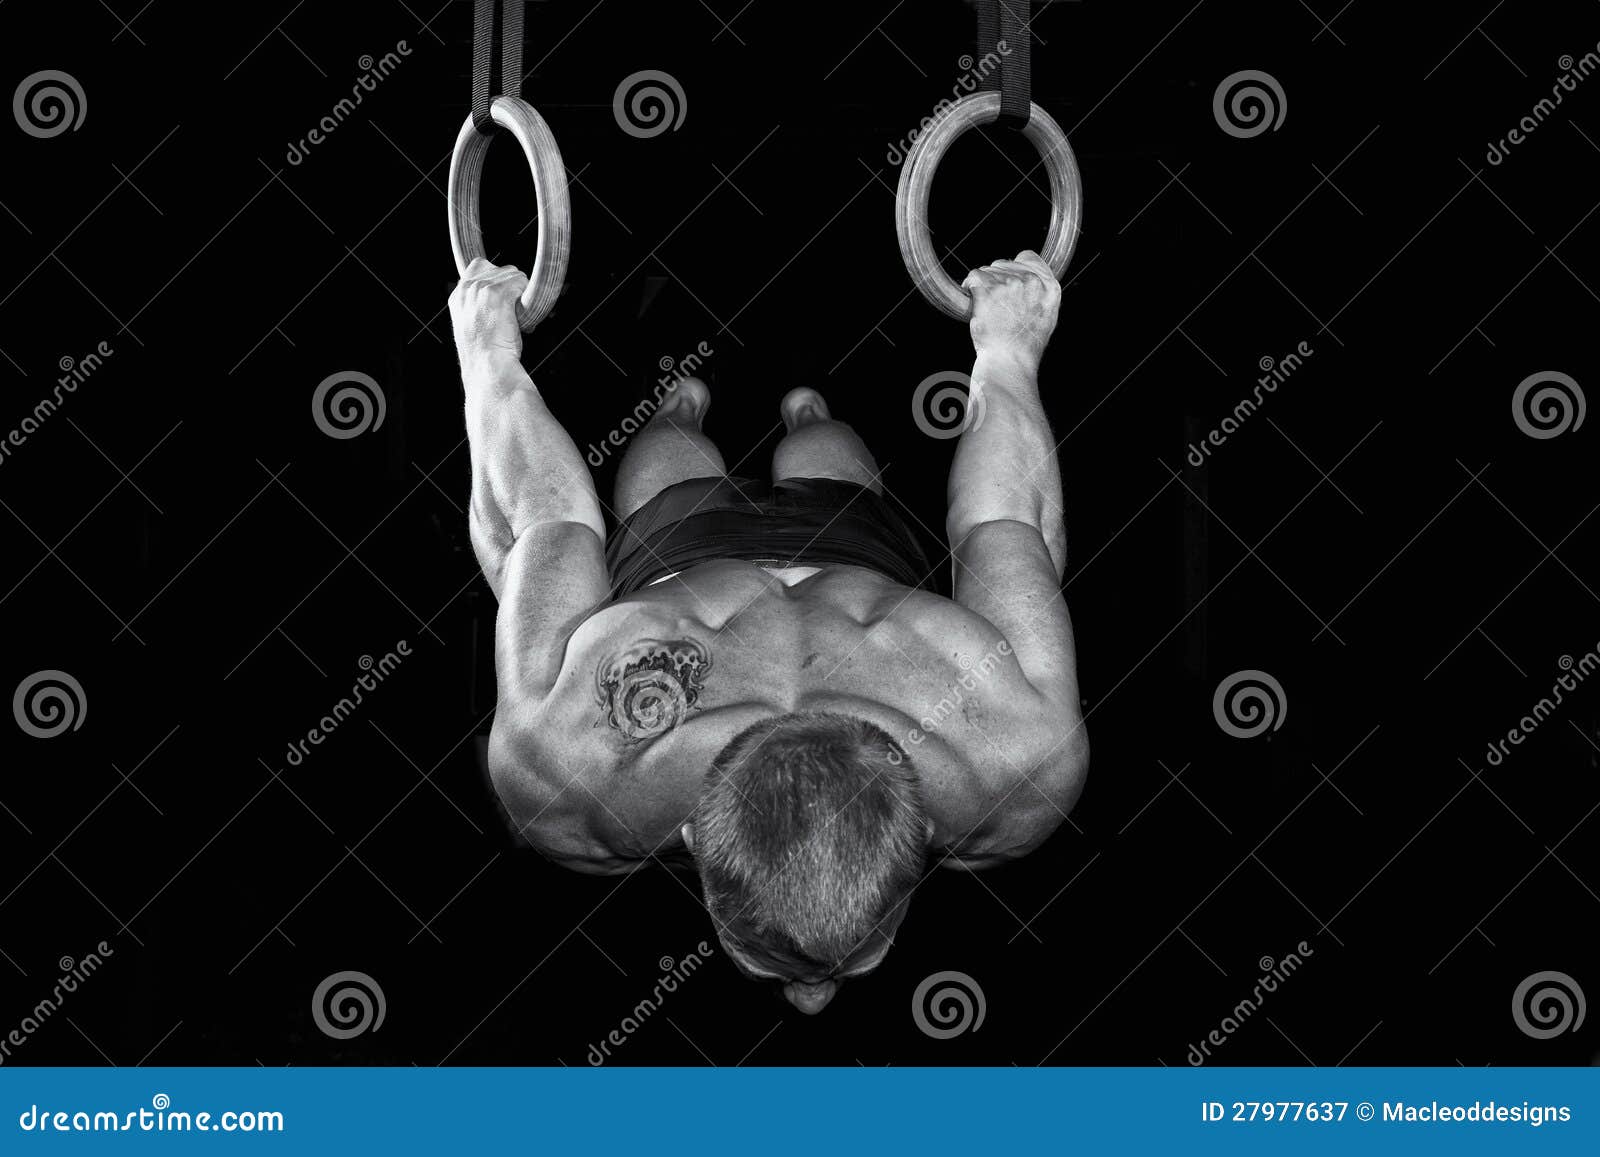 Strong Sexy Gymnast Works On The Rings Stock Image 27977611